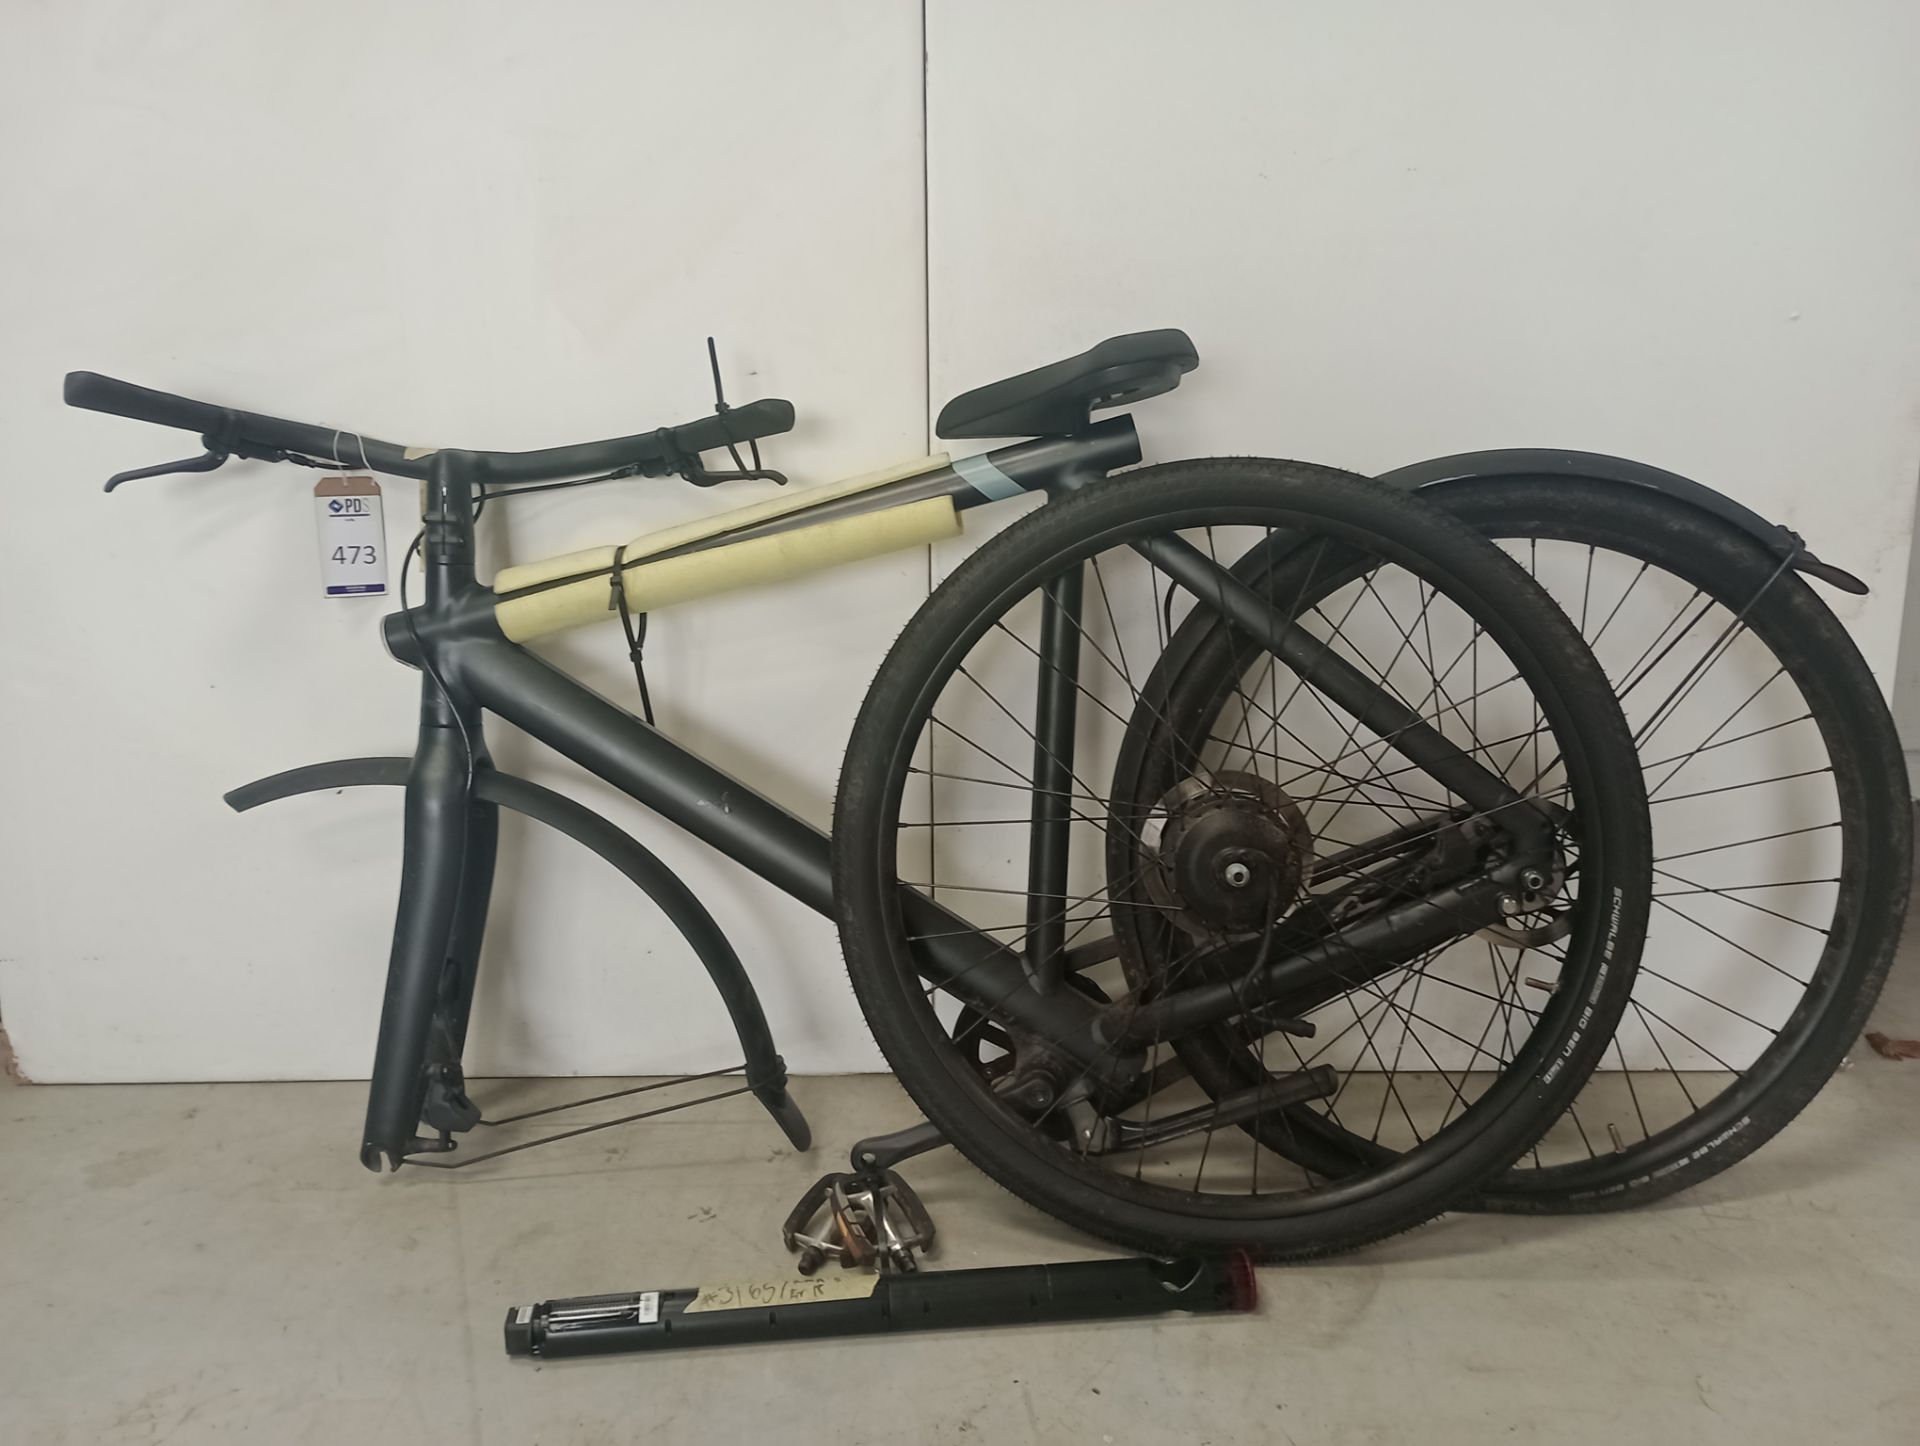 VanMoof S3 Electric Bike, Frame Number ASY1025444 (NOT ROADWORTHY - FOR SPARES ONLY) (No codes